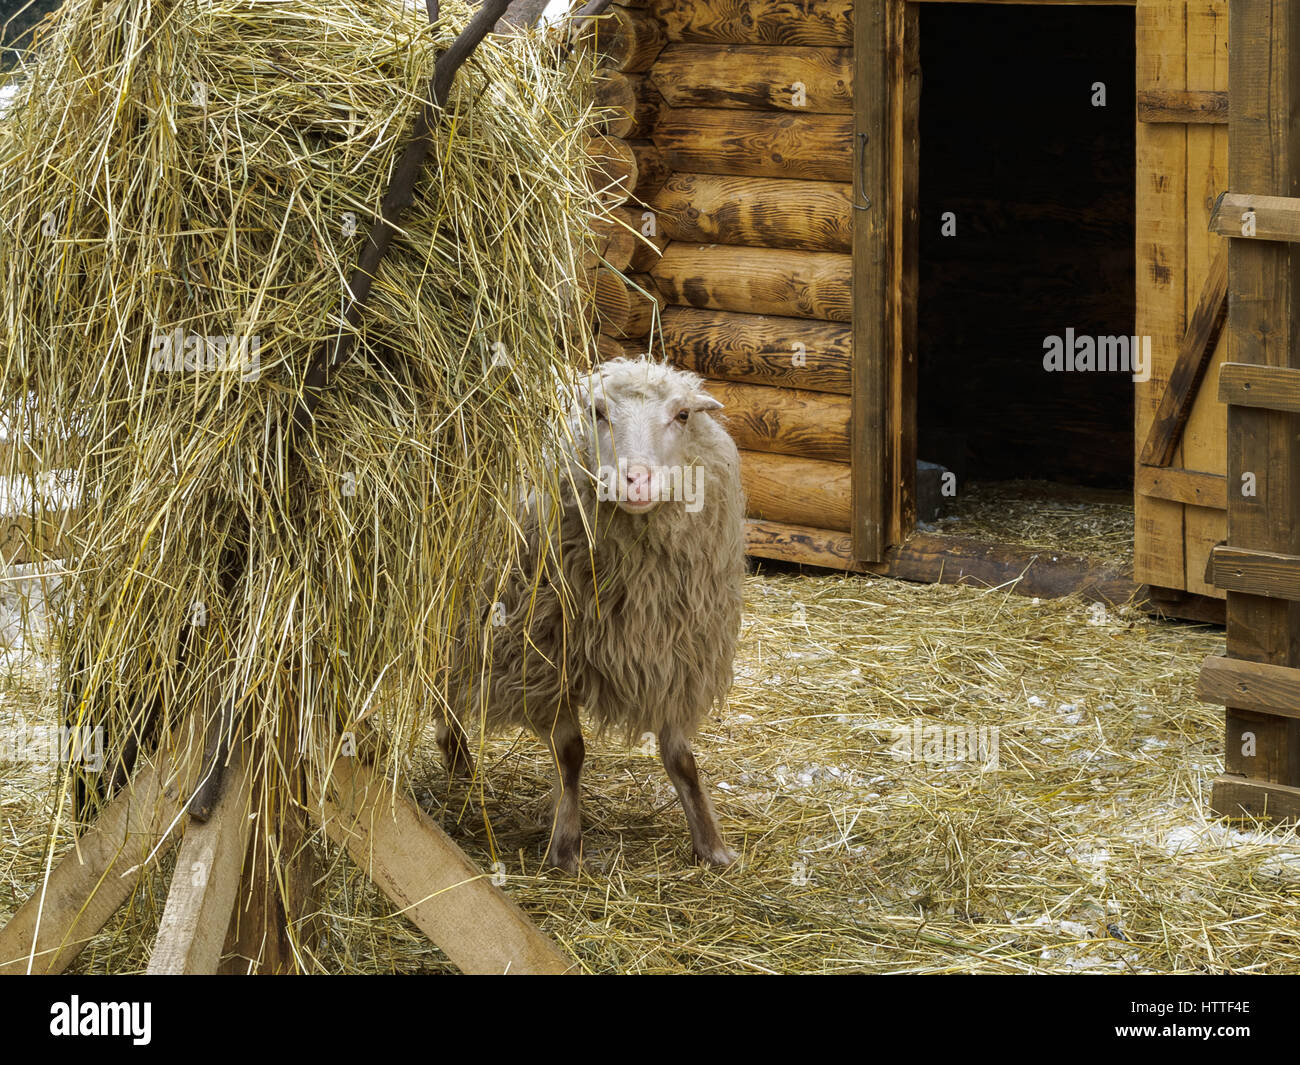 Sheep in pen near haystack standing and looking at you. Winter, snow. Barn door is open Stock Photo